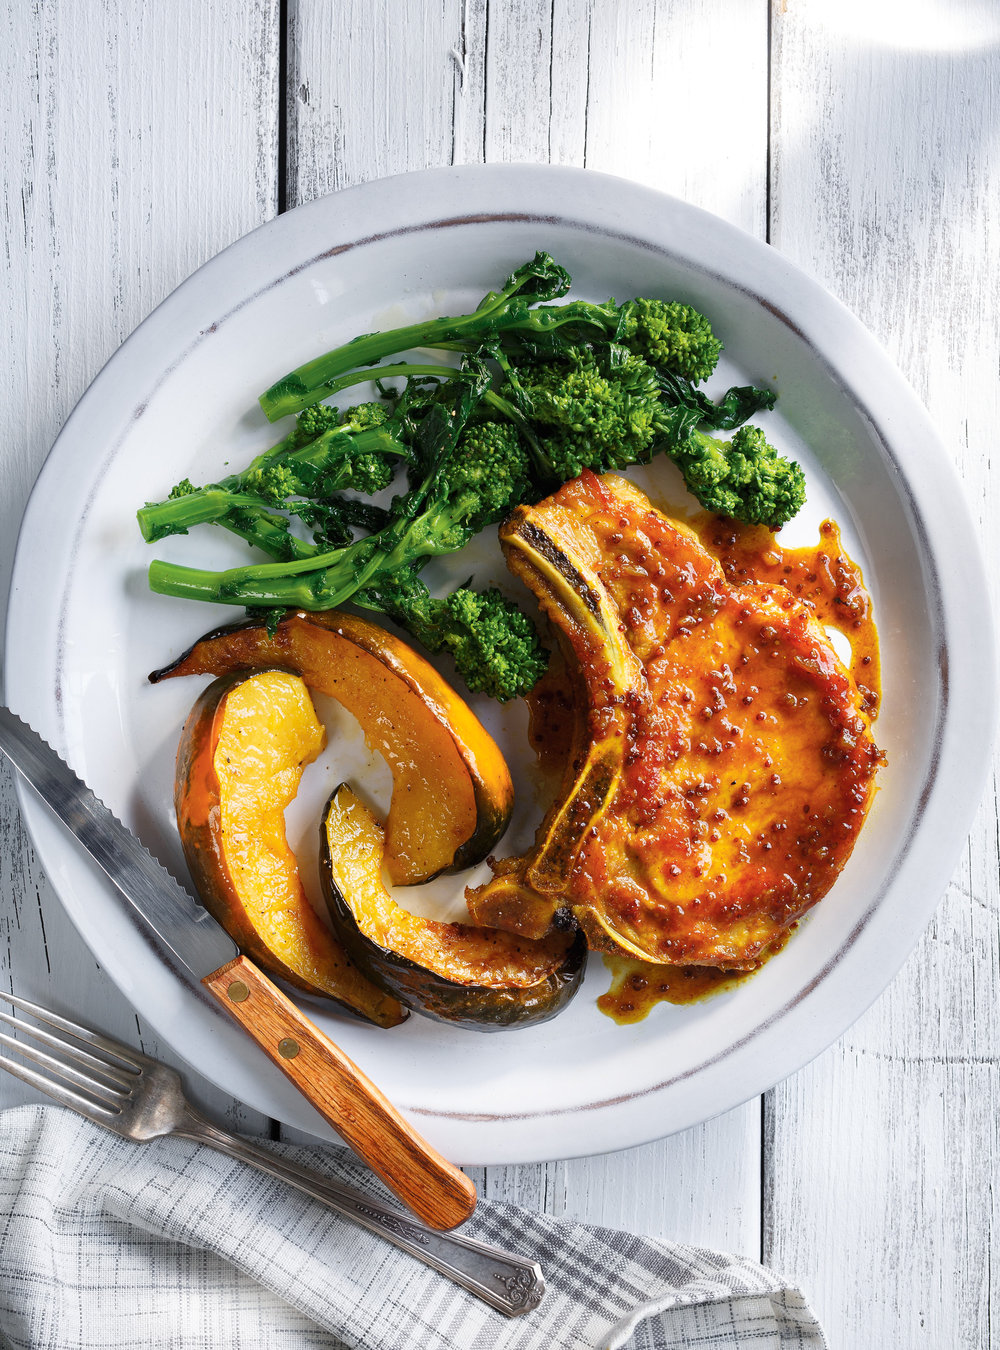 Curried Pork Chops with Roasted Squash